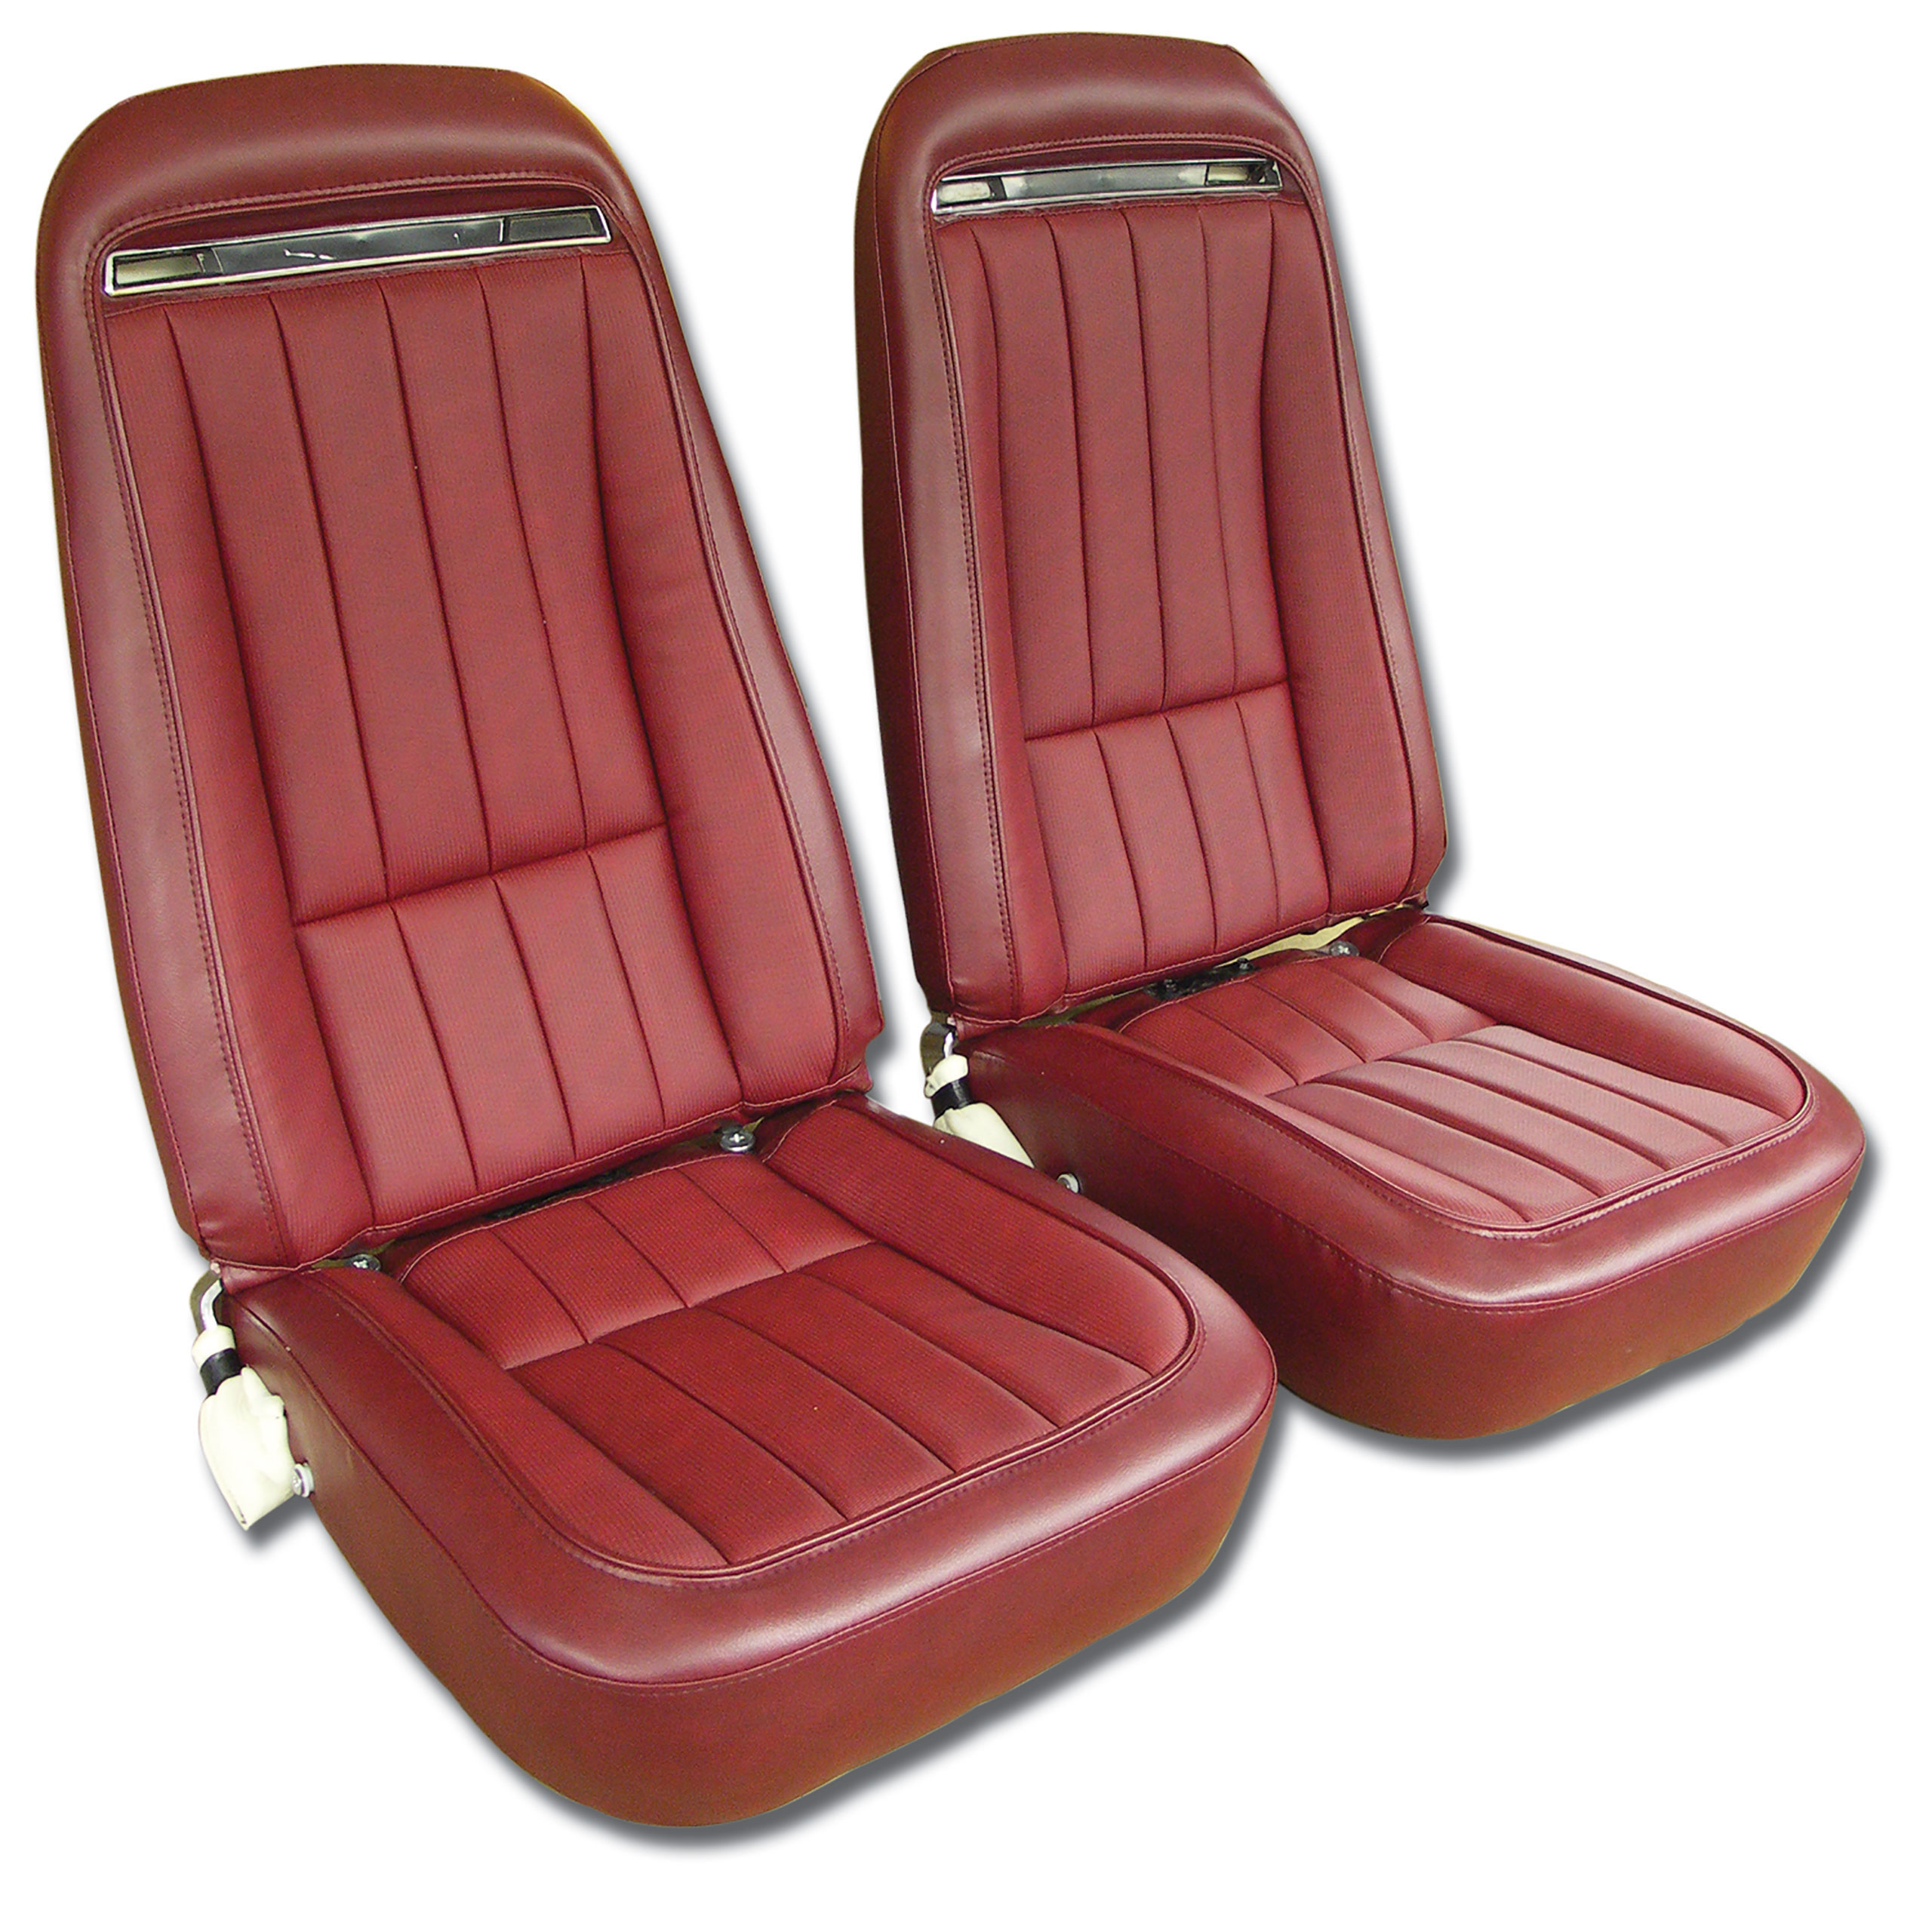 1975 C3 Corvette Mounted Seats Oxblood "Leather-Like" Vinyl With Shoulder Harness